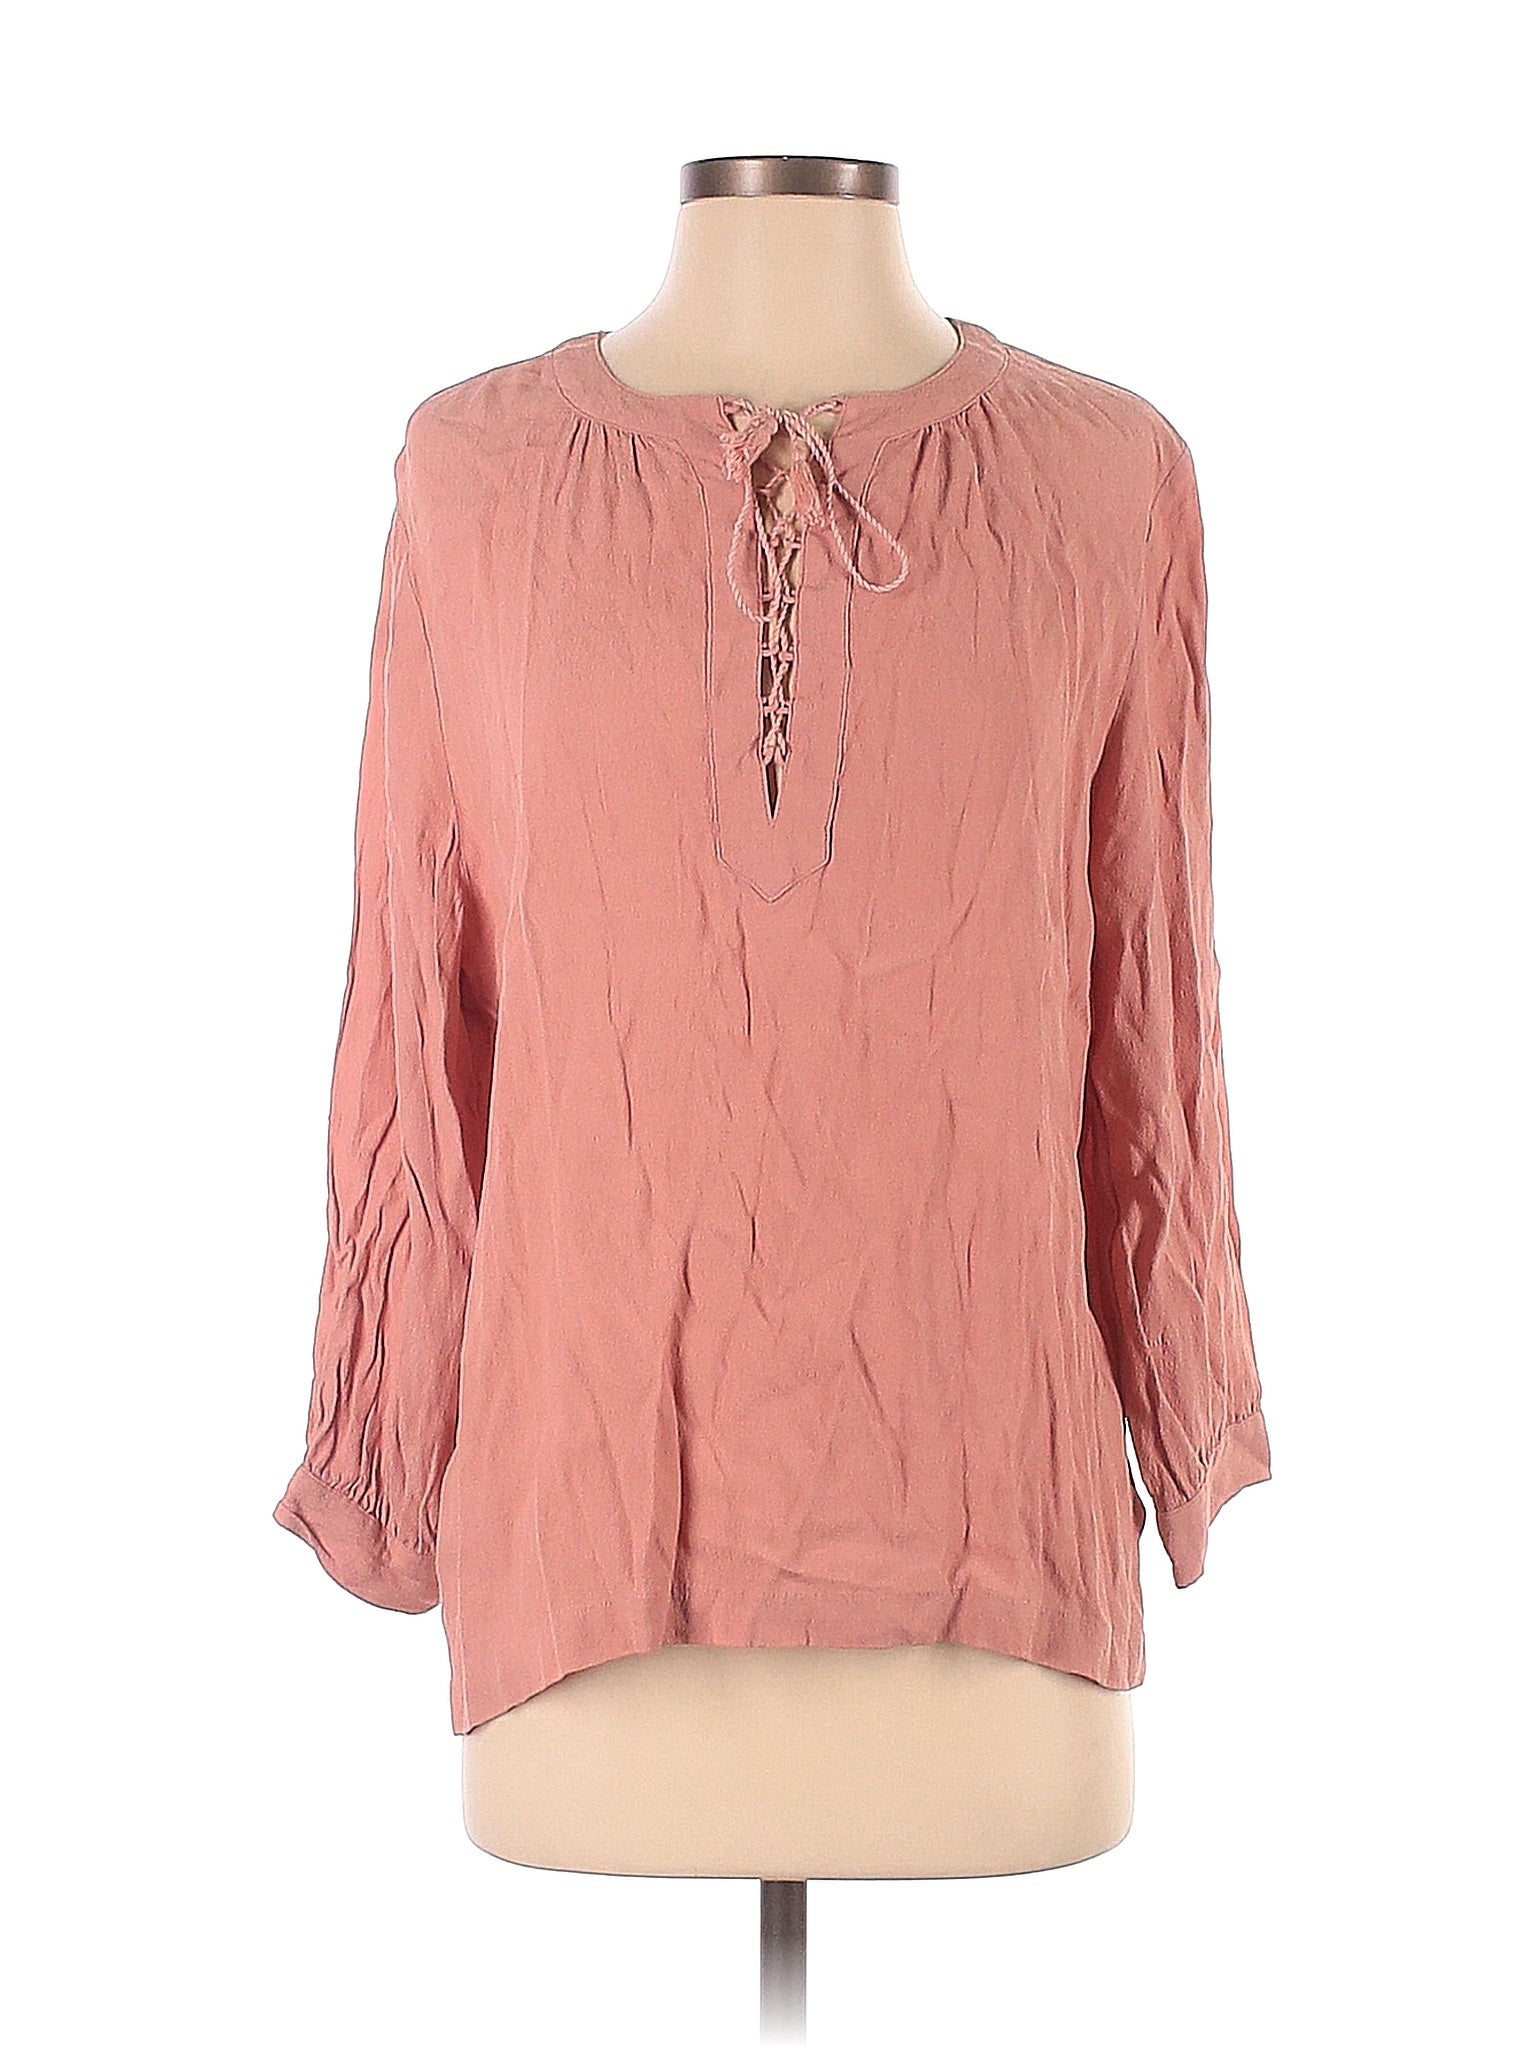 Long Sleeve Blouse size - S